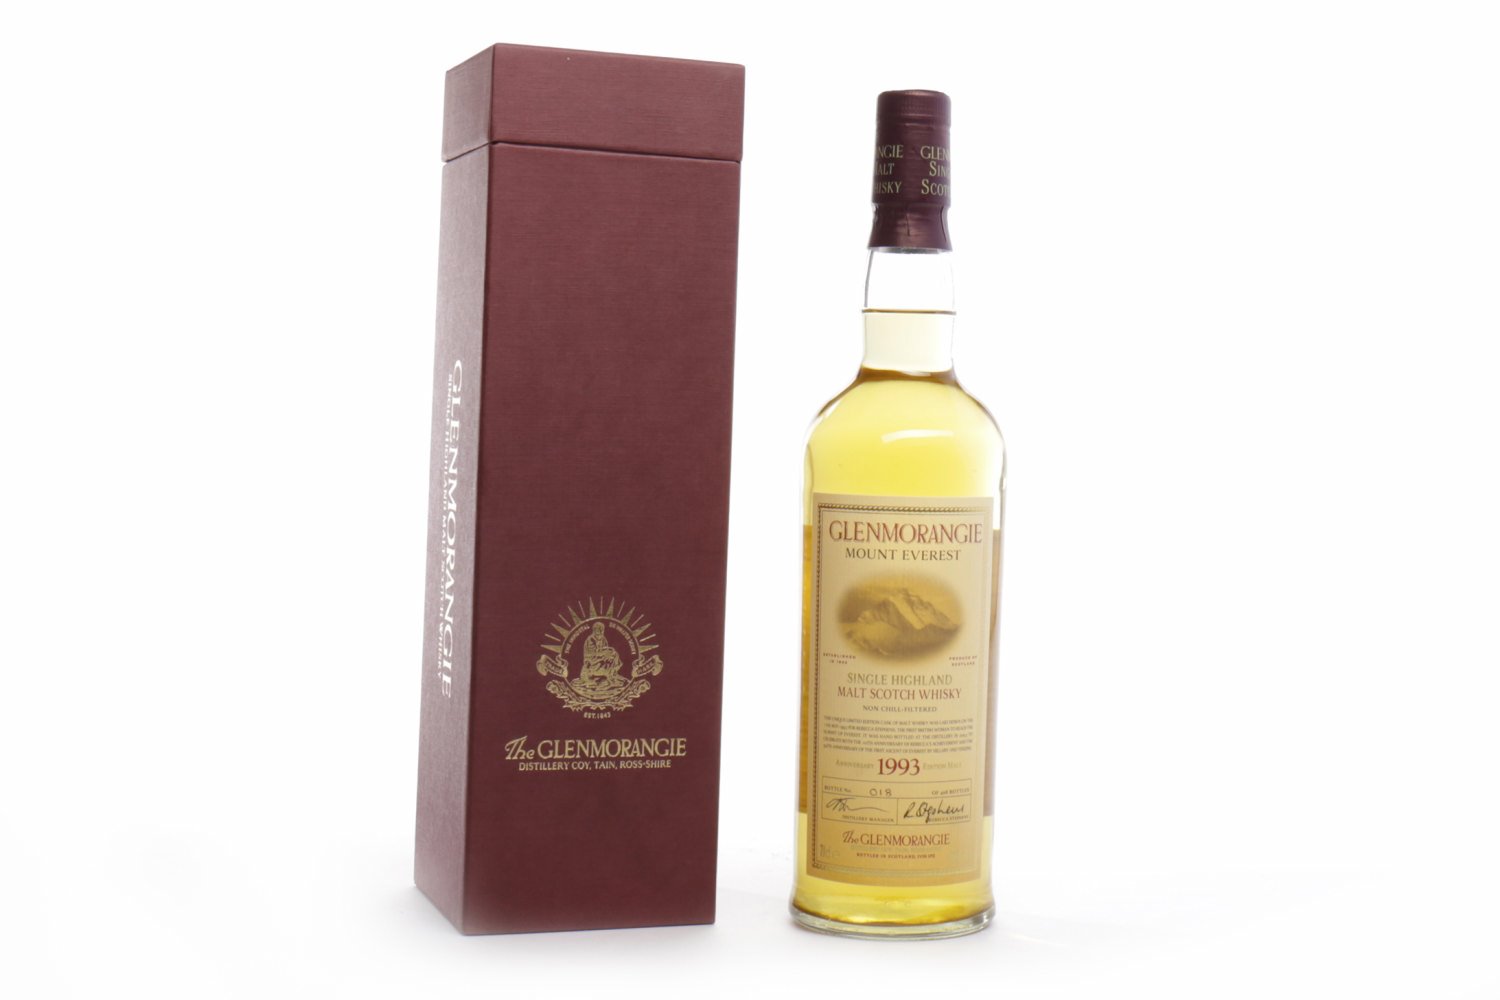 GLENMORANGIE 1993 MOUNT EVEREST AGED 10 YEARS Active. Tain, Ross-shire.